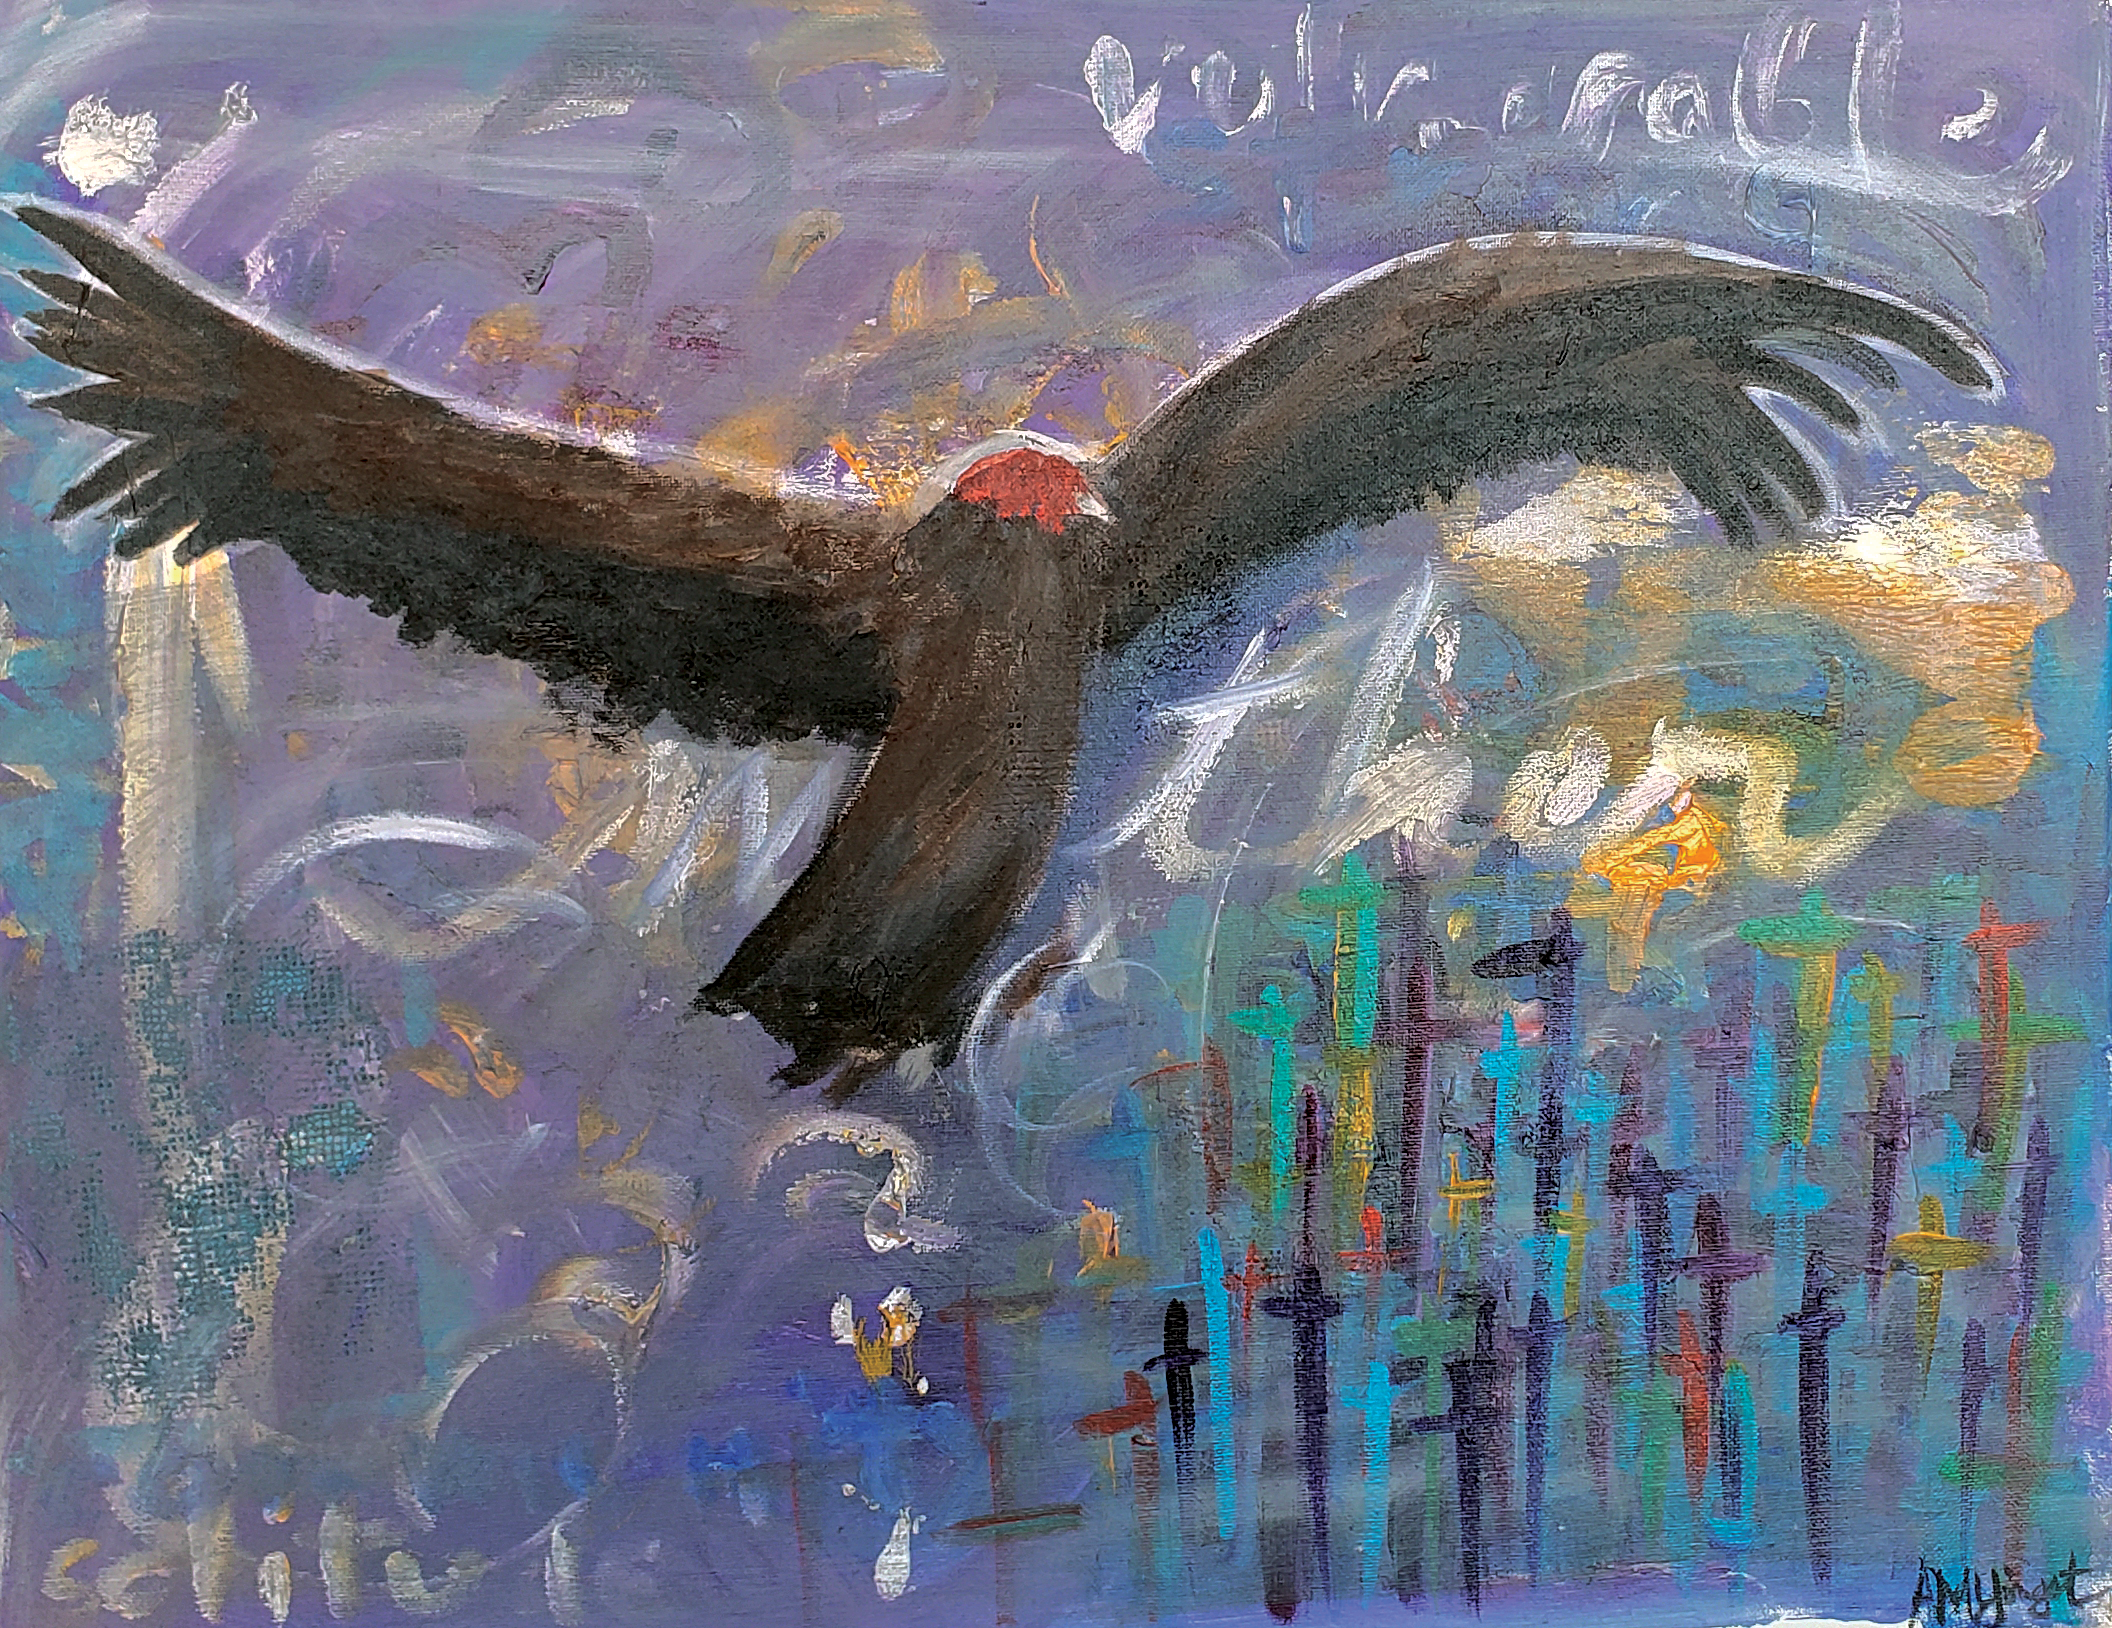  Sister Vulture, painted in 2015 